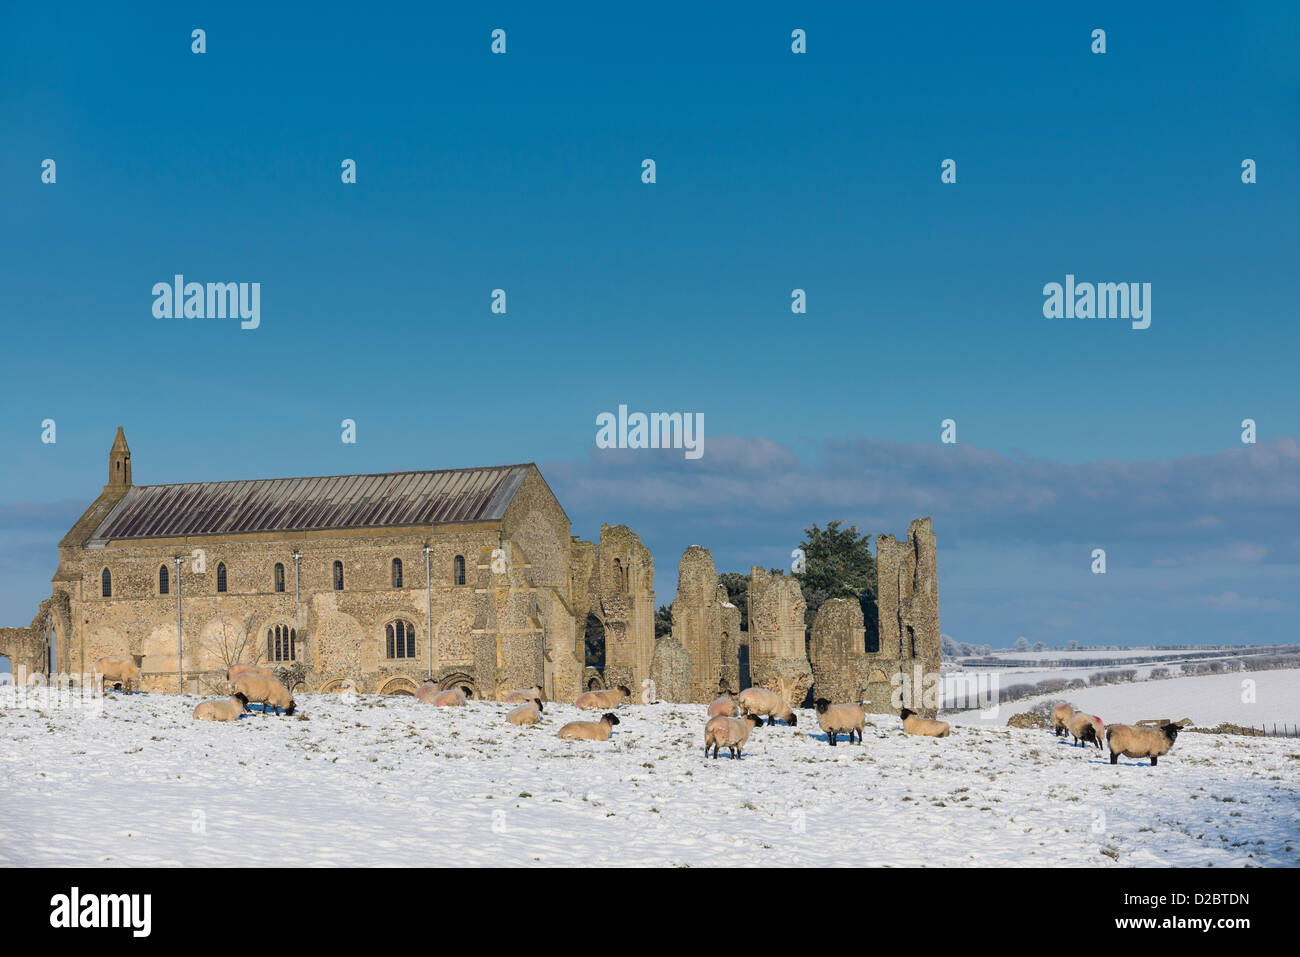 Sheep grazing on snow covered field, with Binham priory in background, Norfolk, England, January Stock Photo